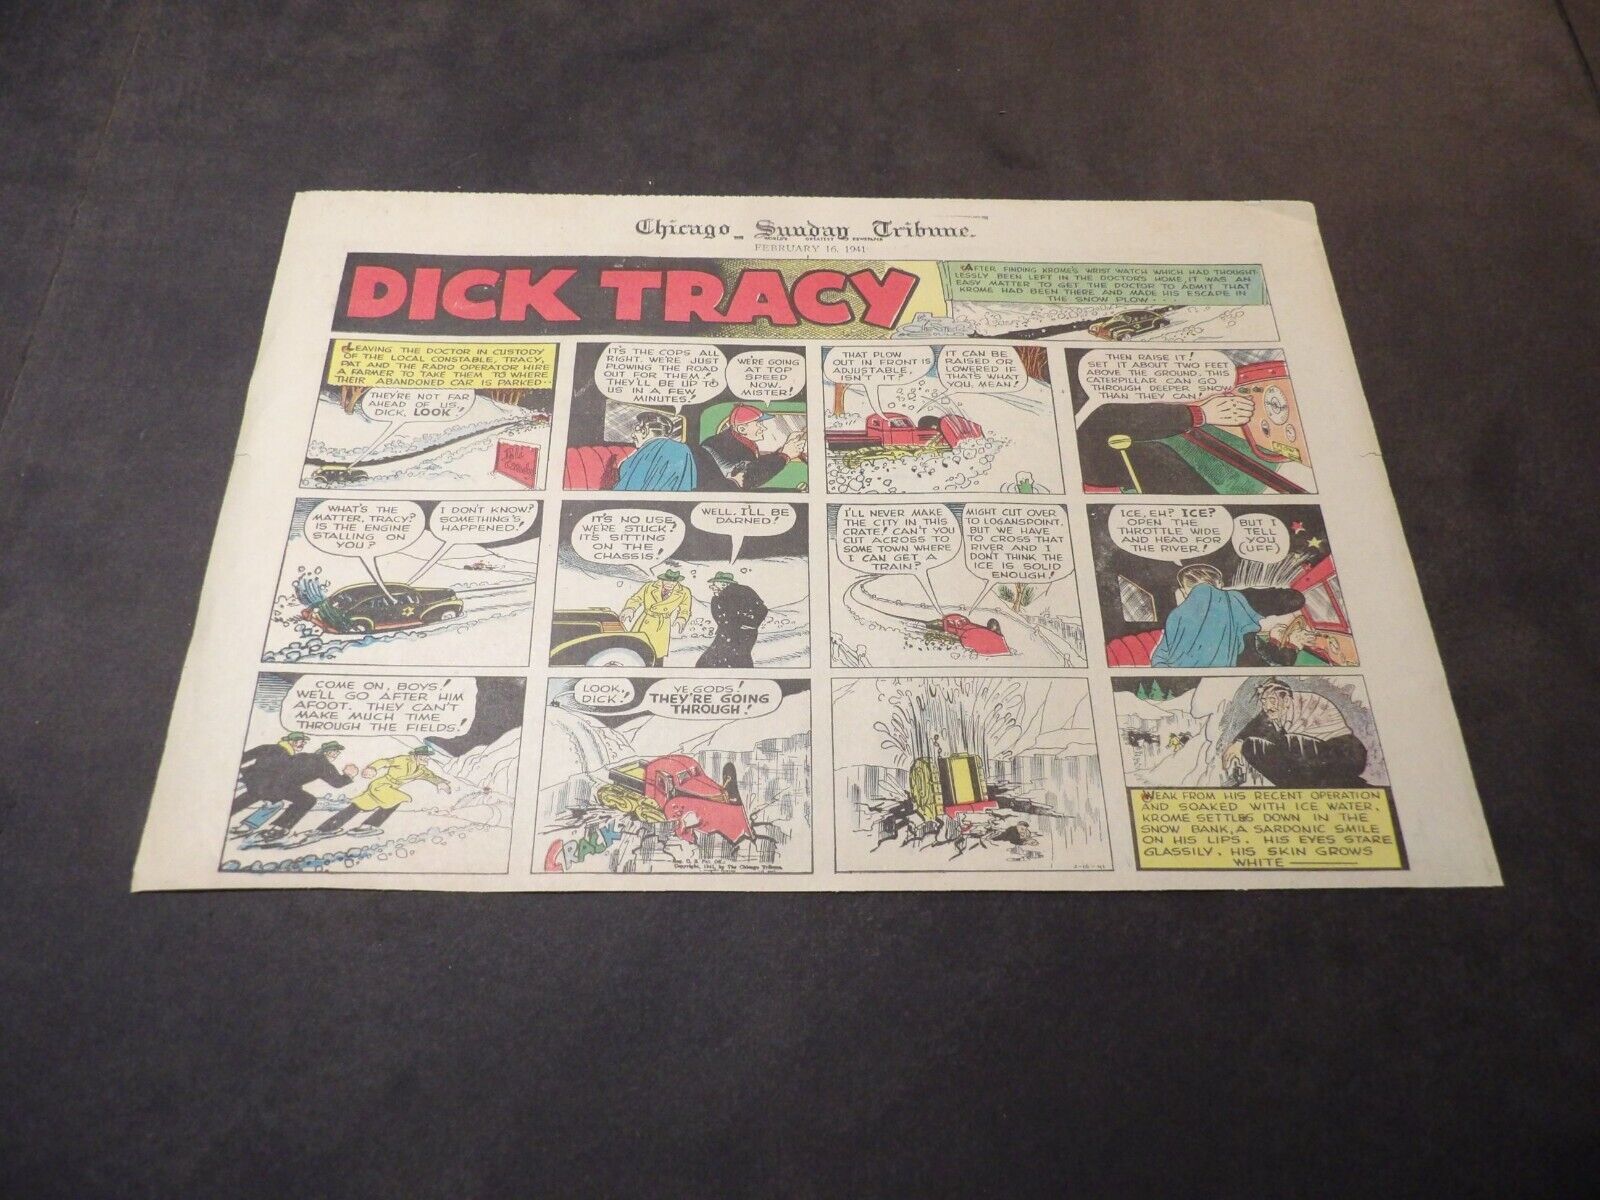 Dick Tracy by Chester Gould - Feb 16, 1941 - Half-size Sunday - Death of Krome